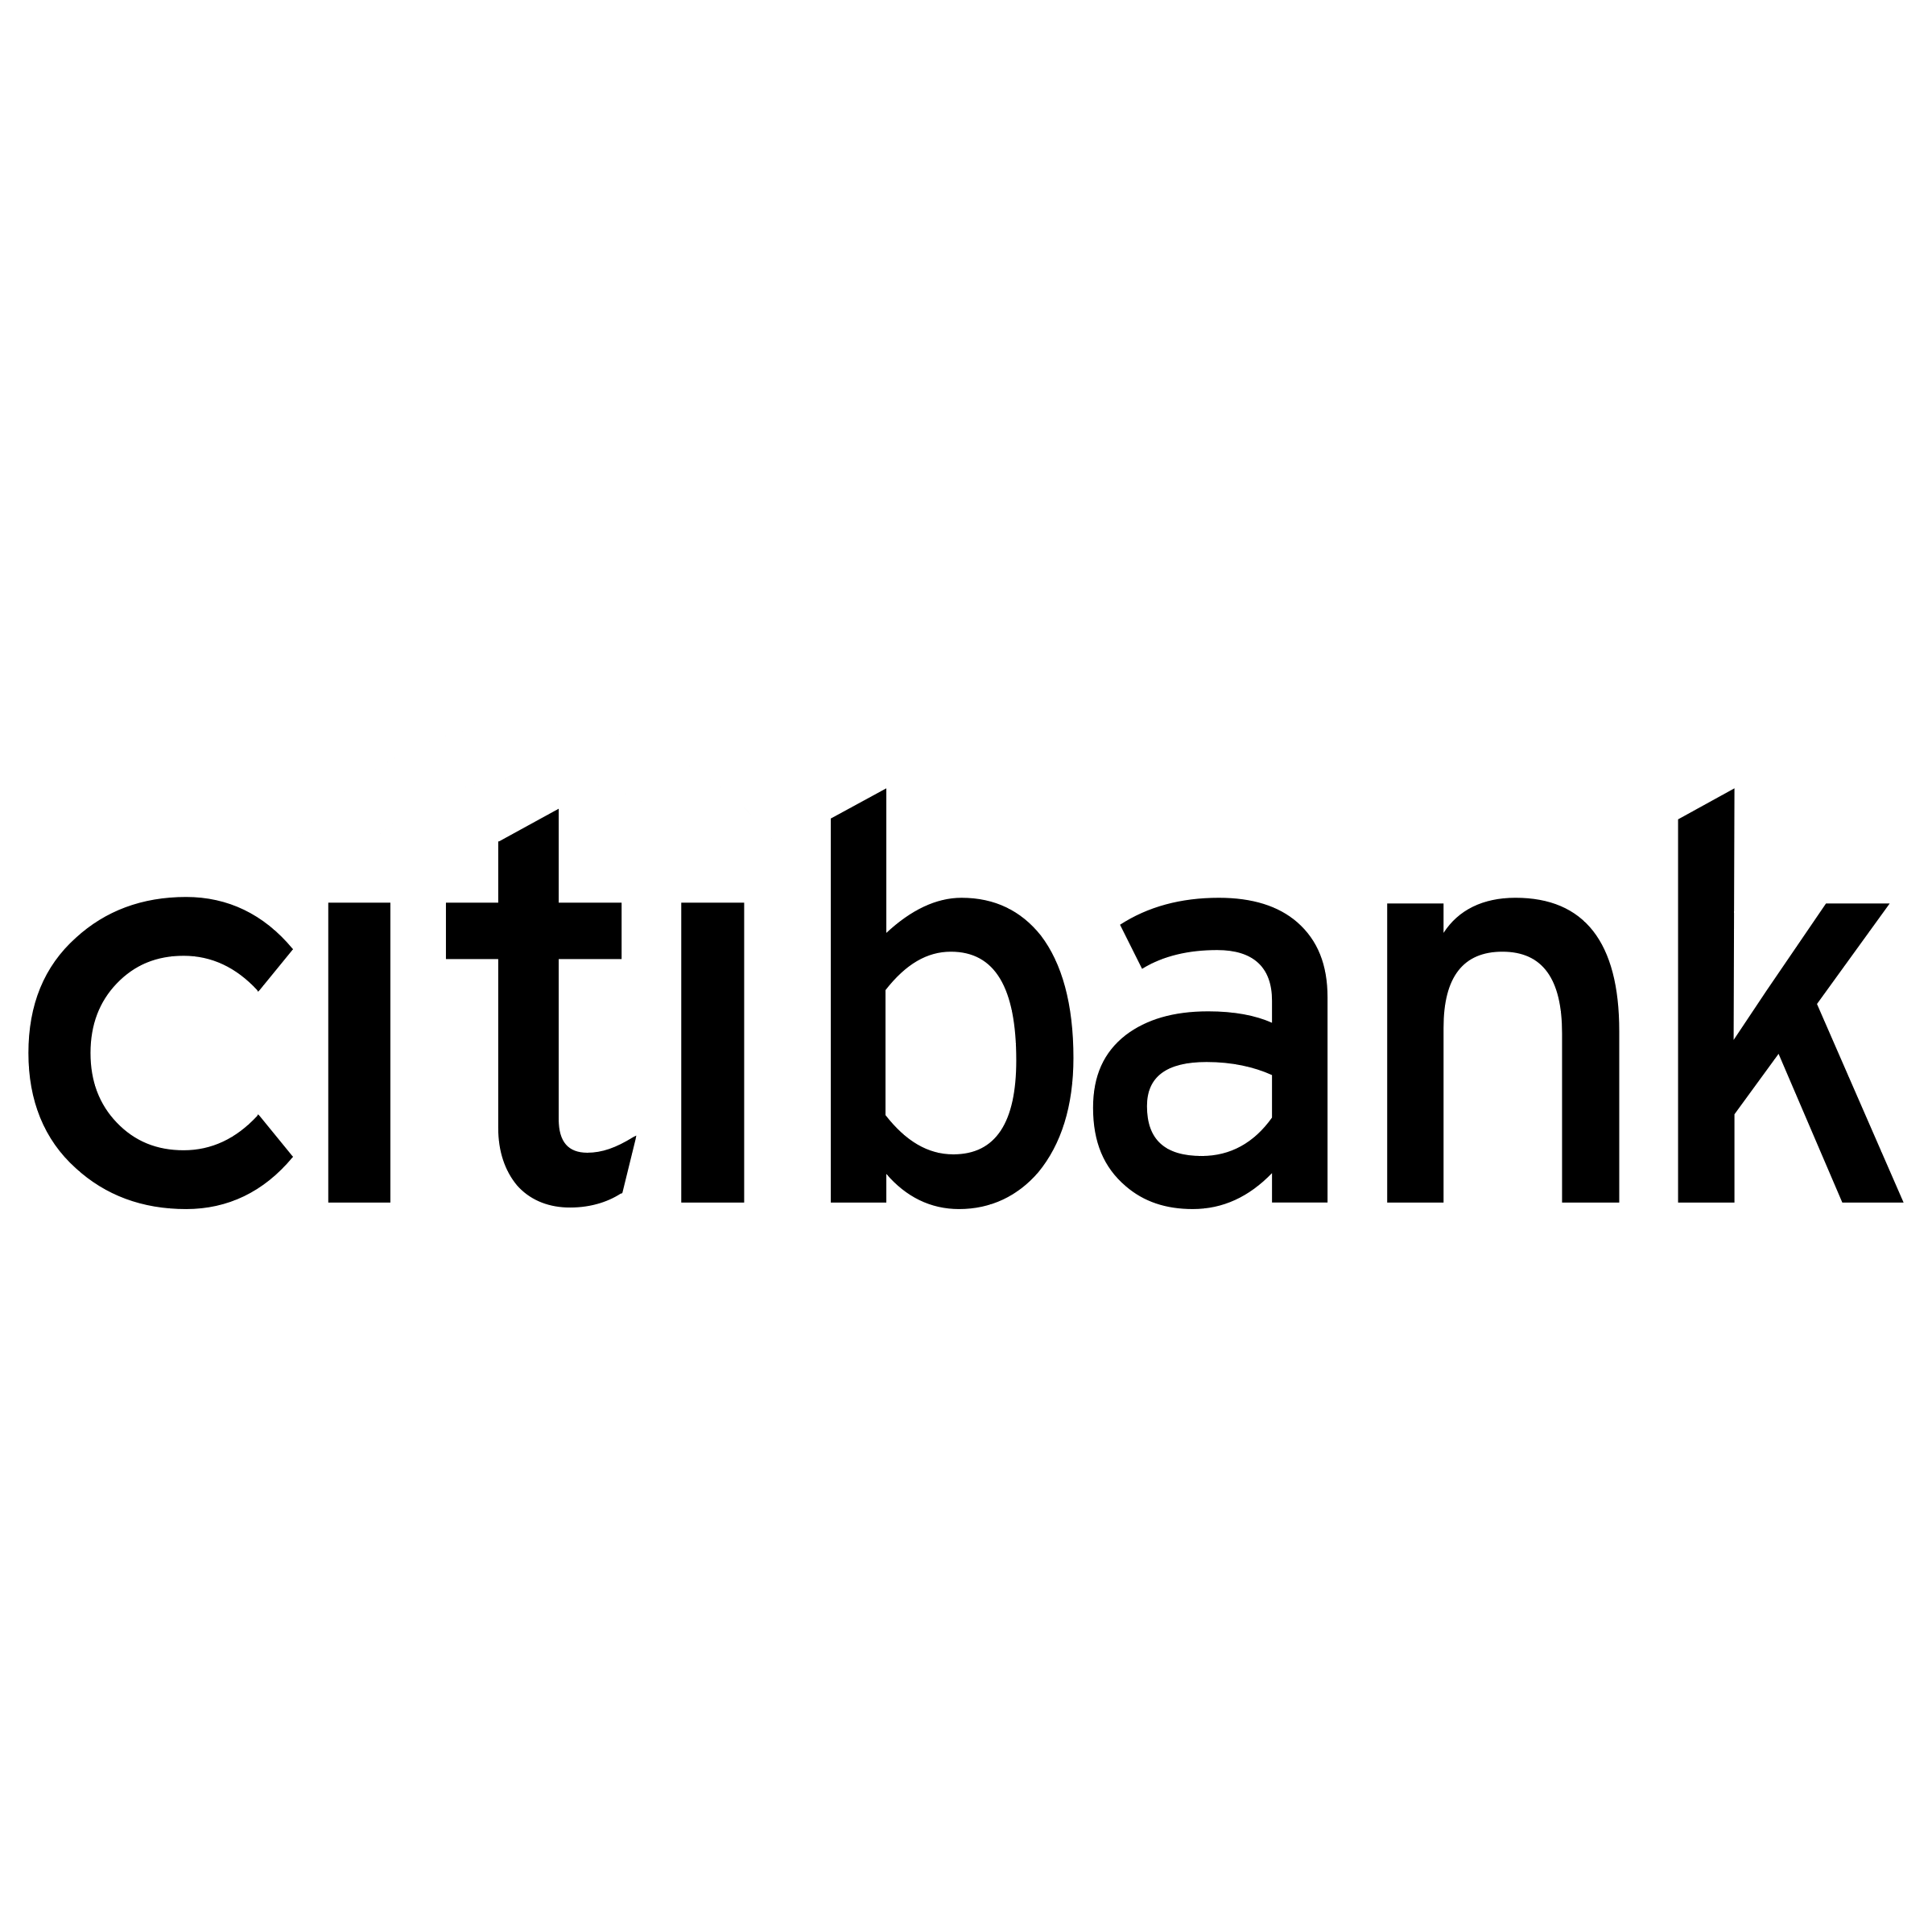 citibank-1-logo-black-and-white.png